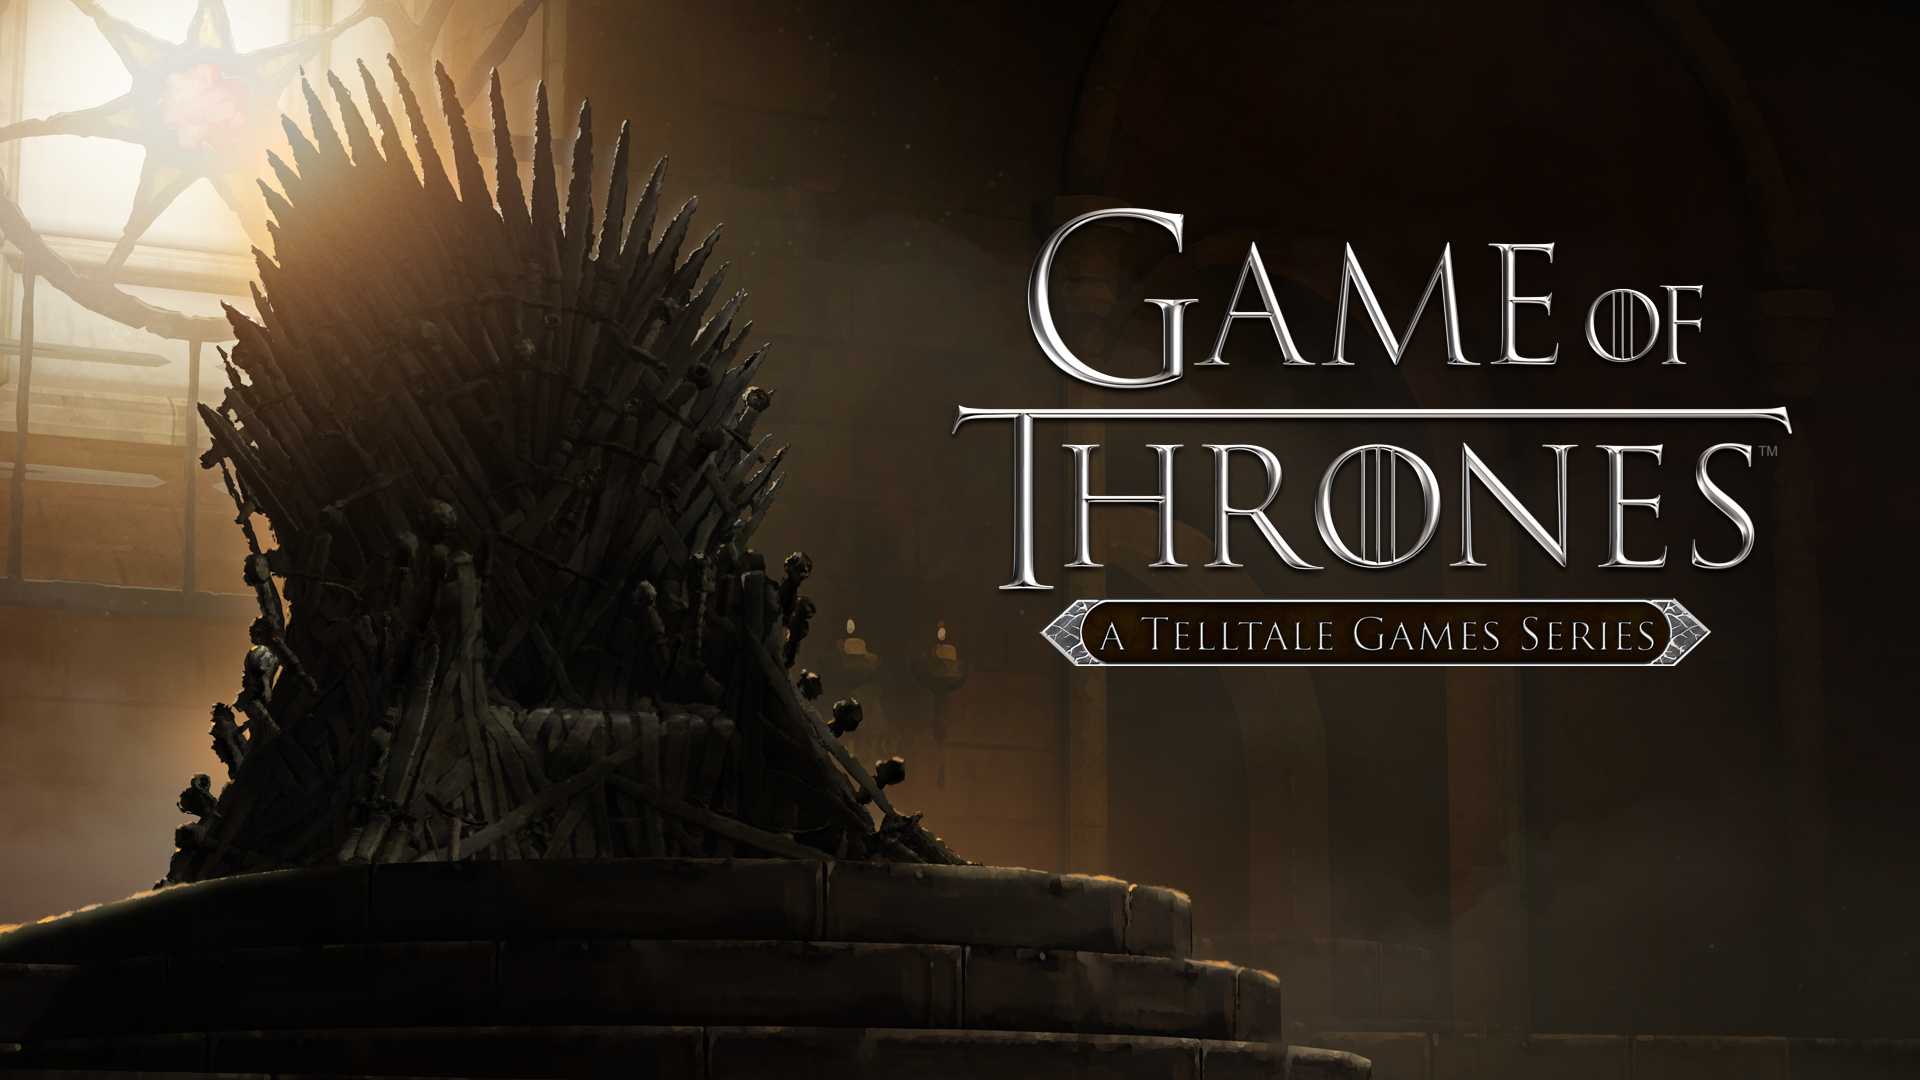 game of thrones xbox store